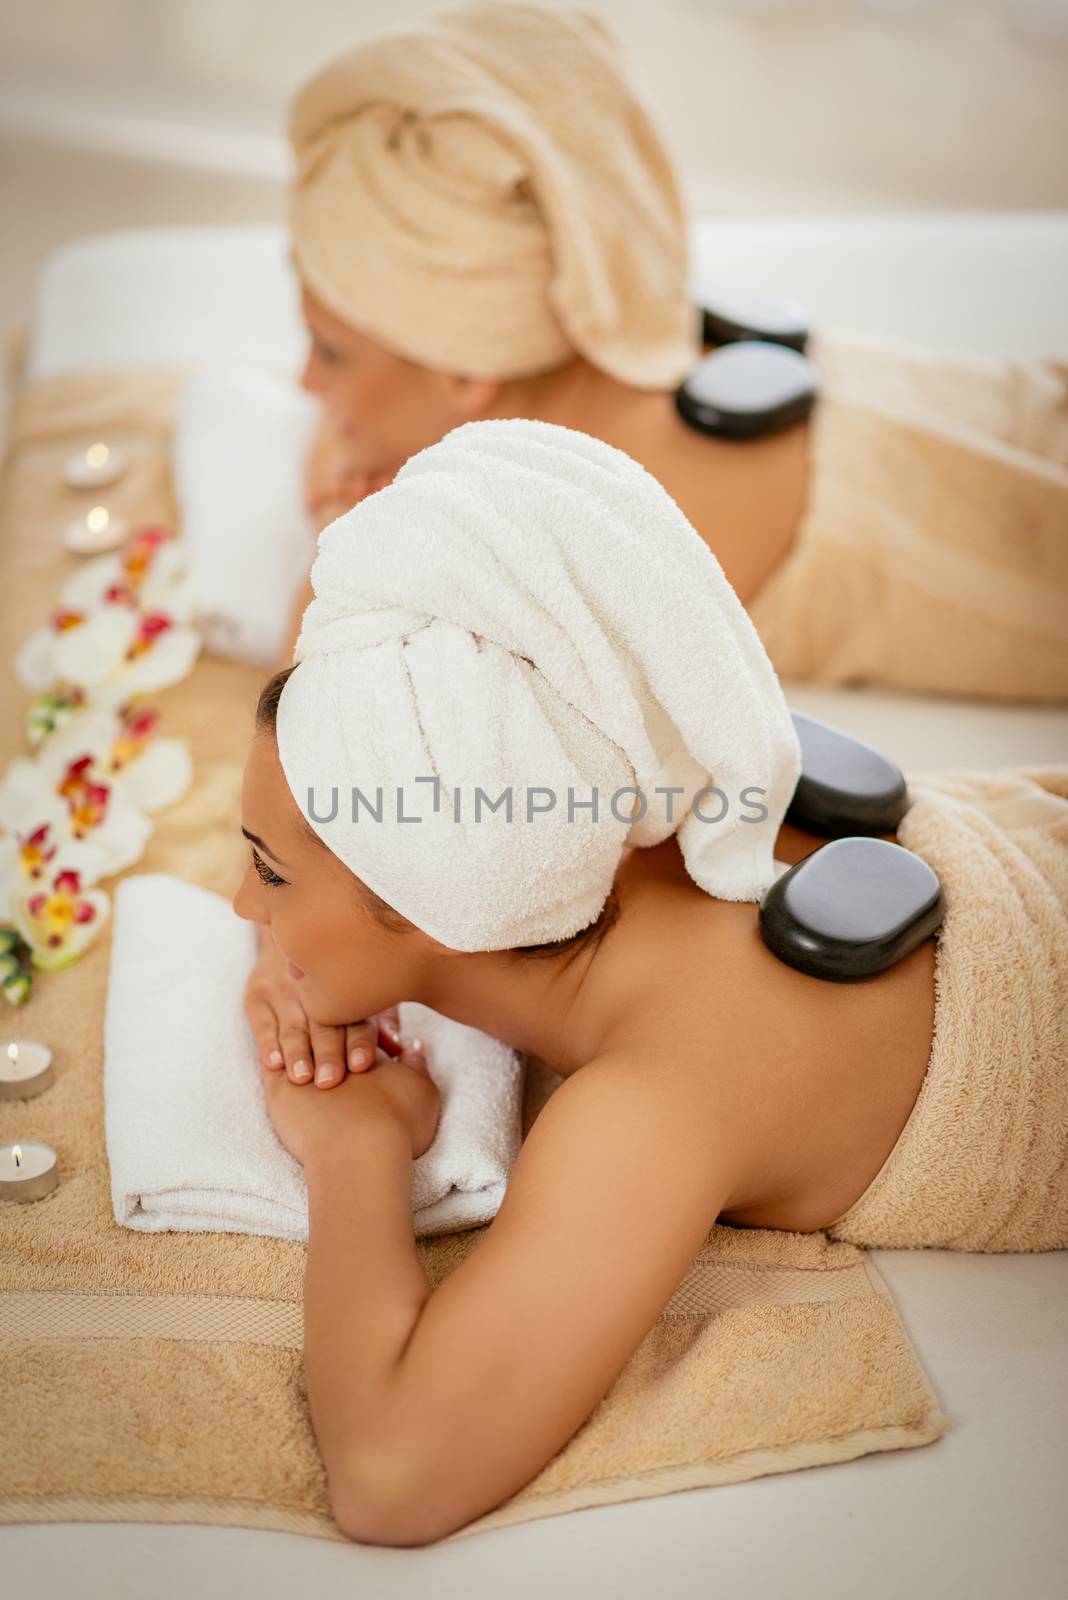 Two cute young women enjoying during a skin care treatment at a spa.